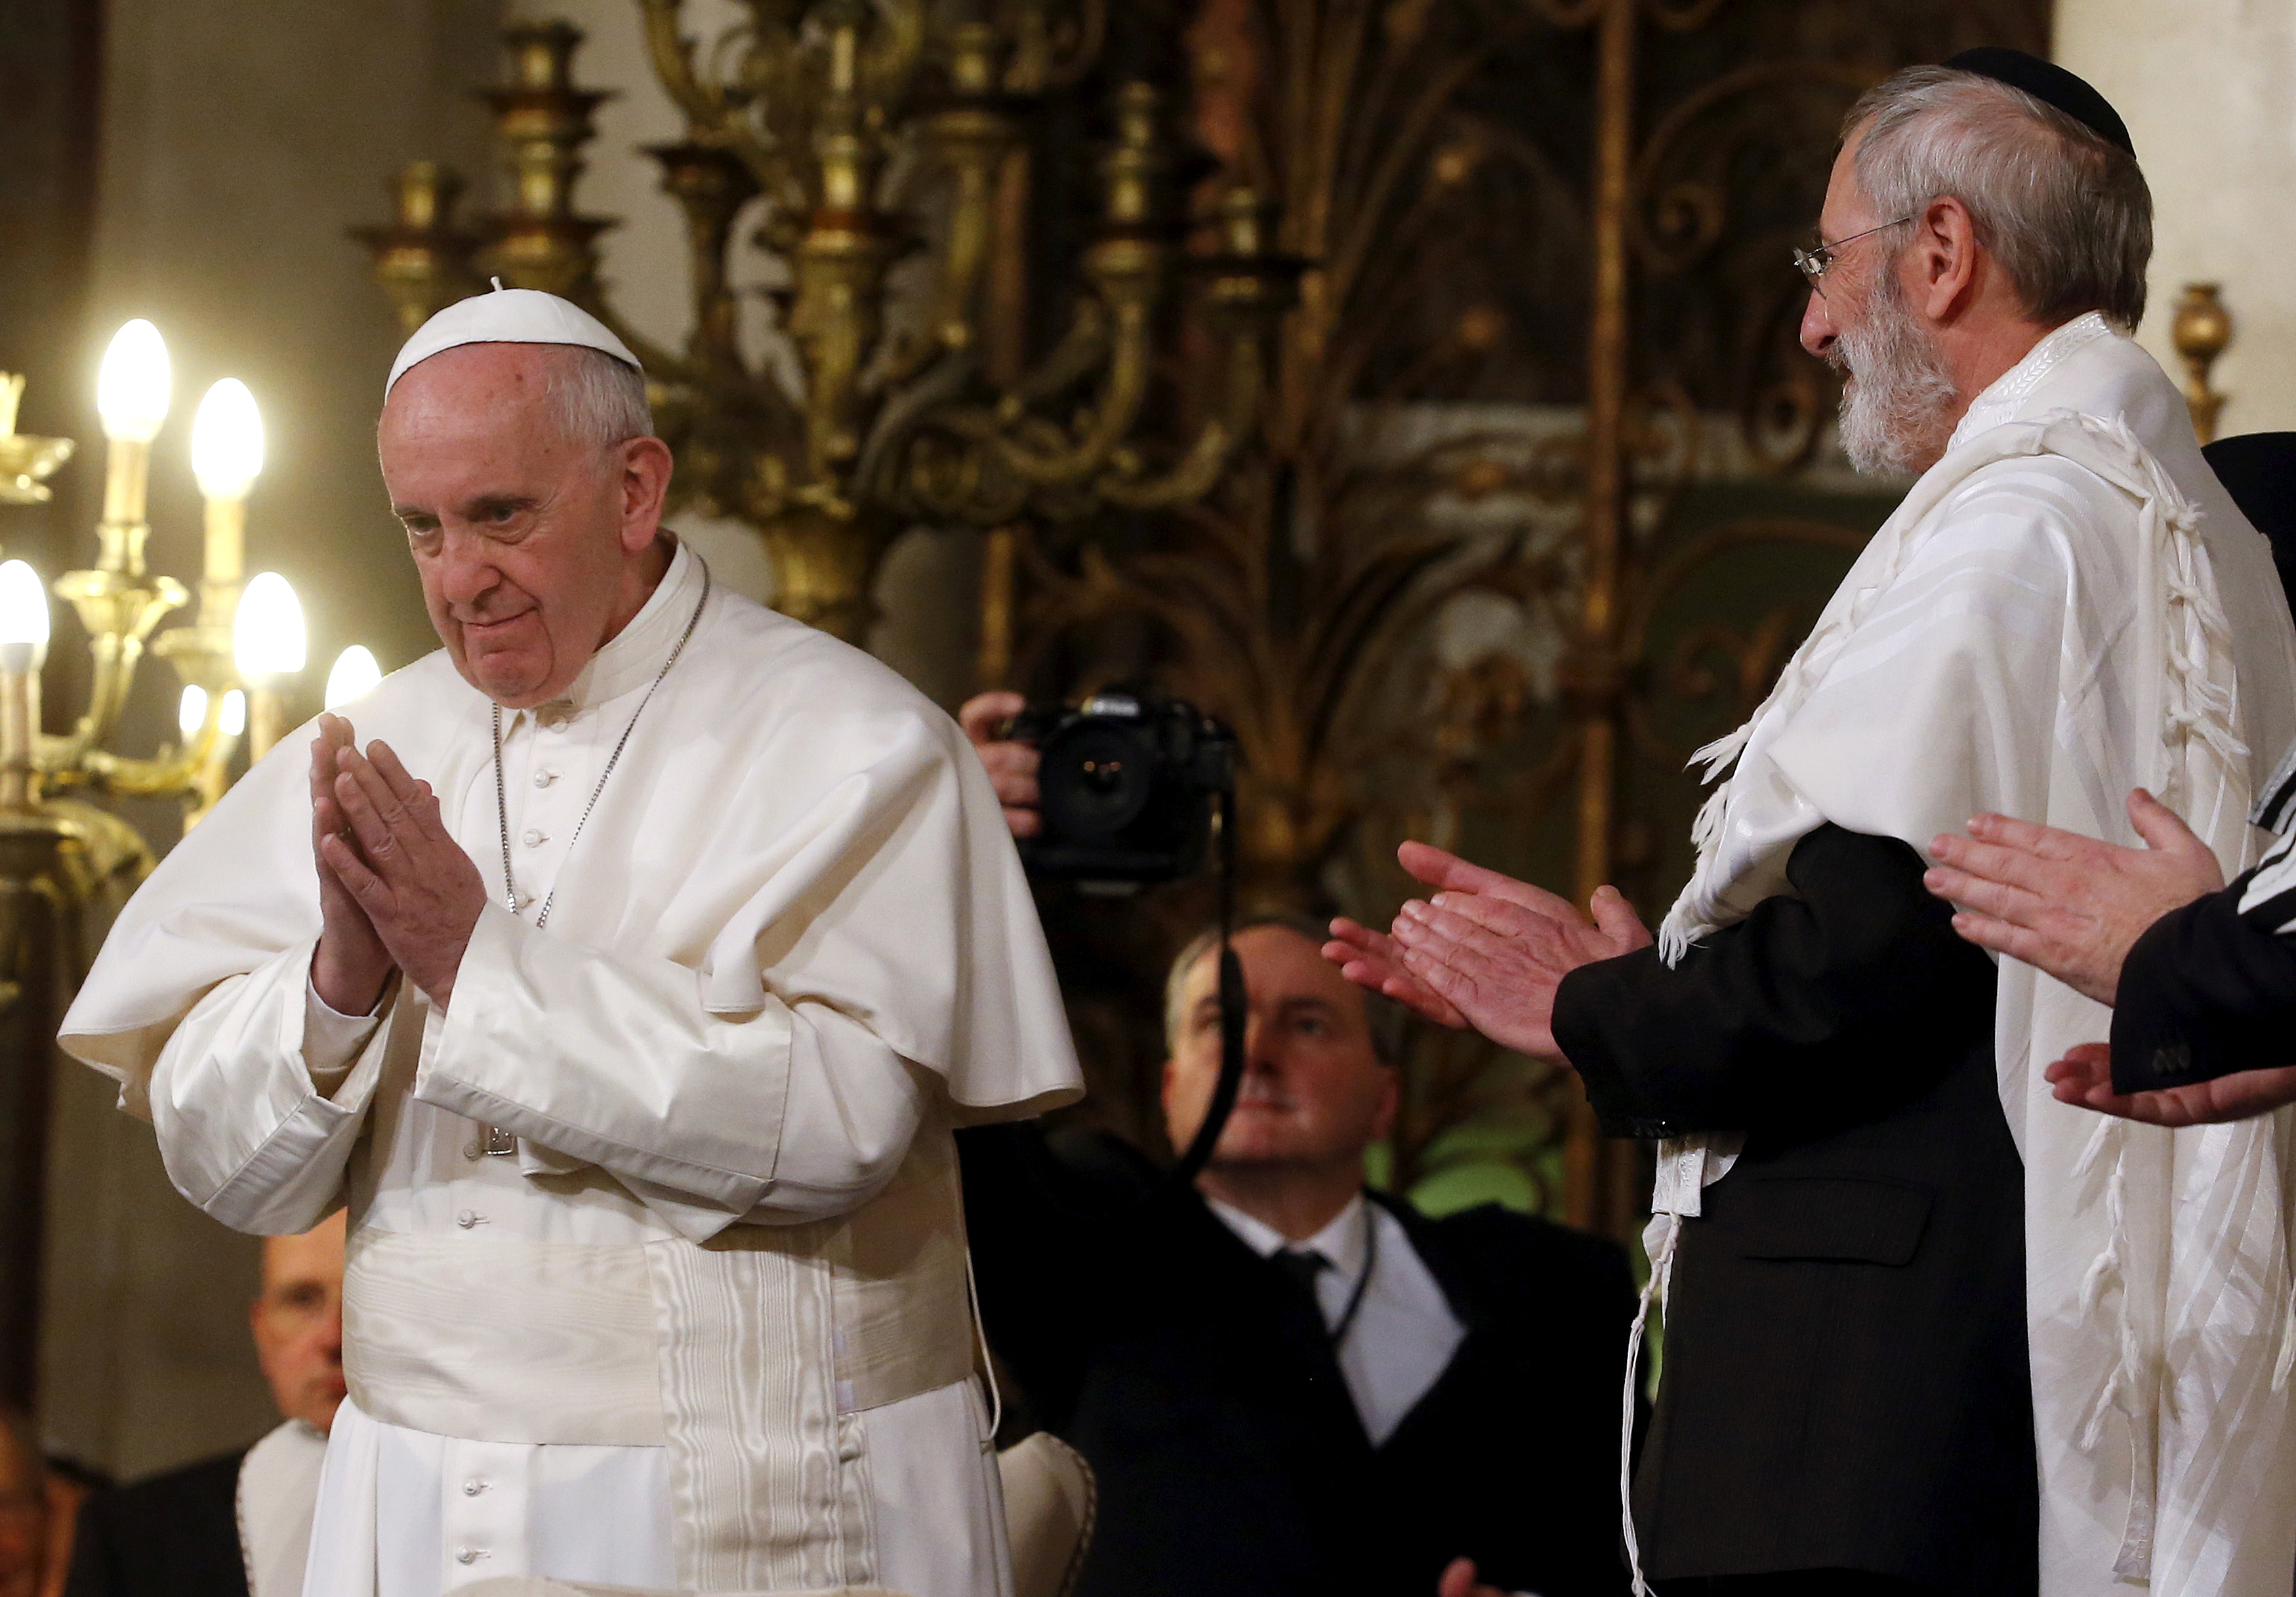 Pope Francis gestures at the end of his visit at Rome's Great Synagogue